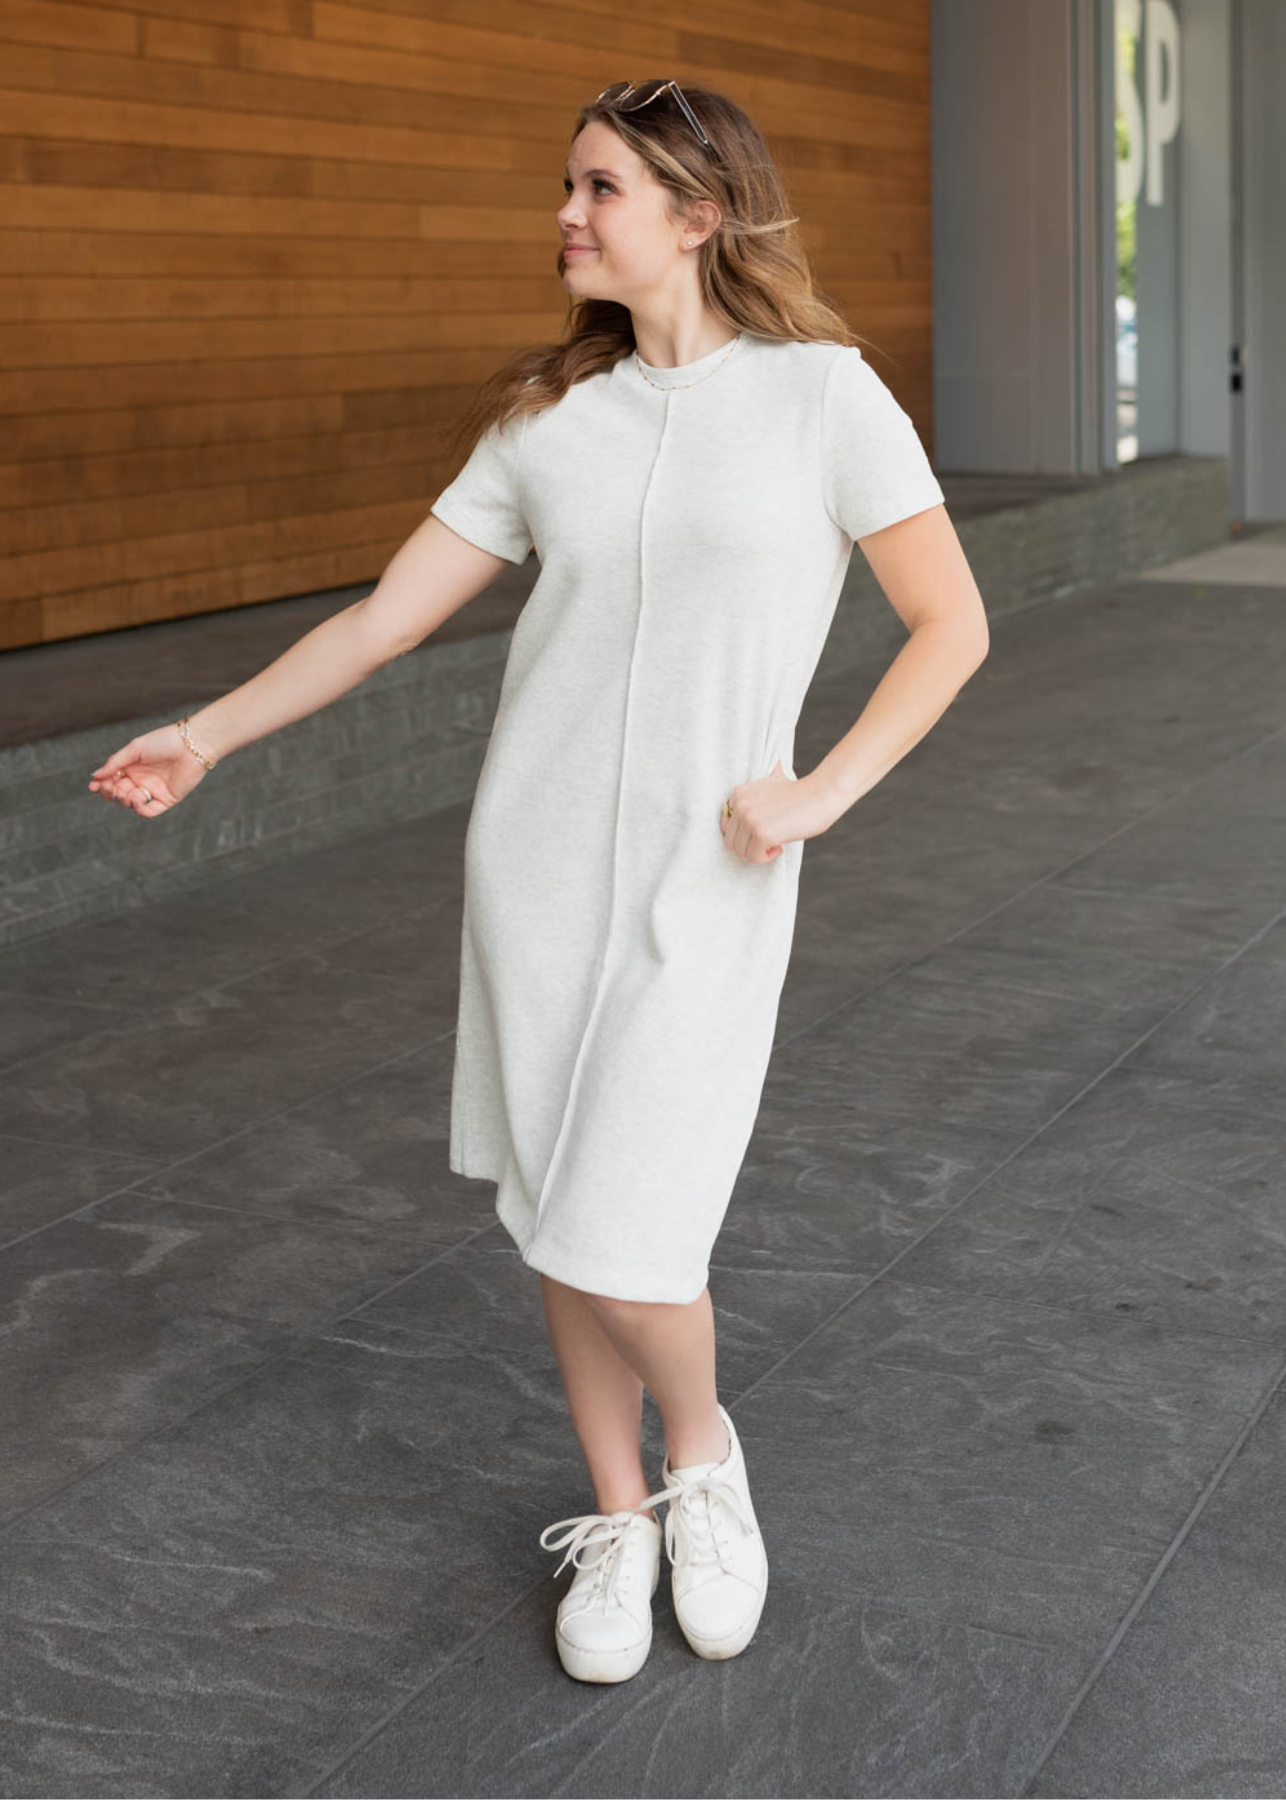 At the knee heather grey knit dress